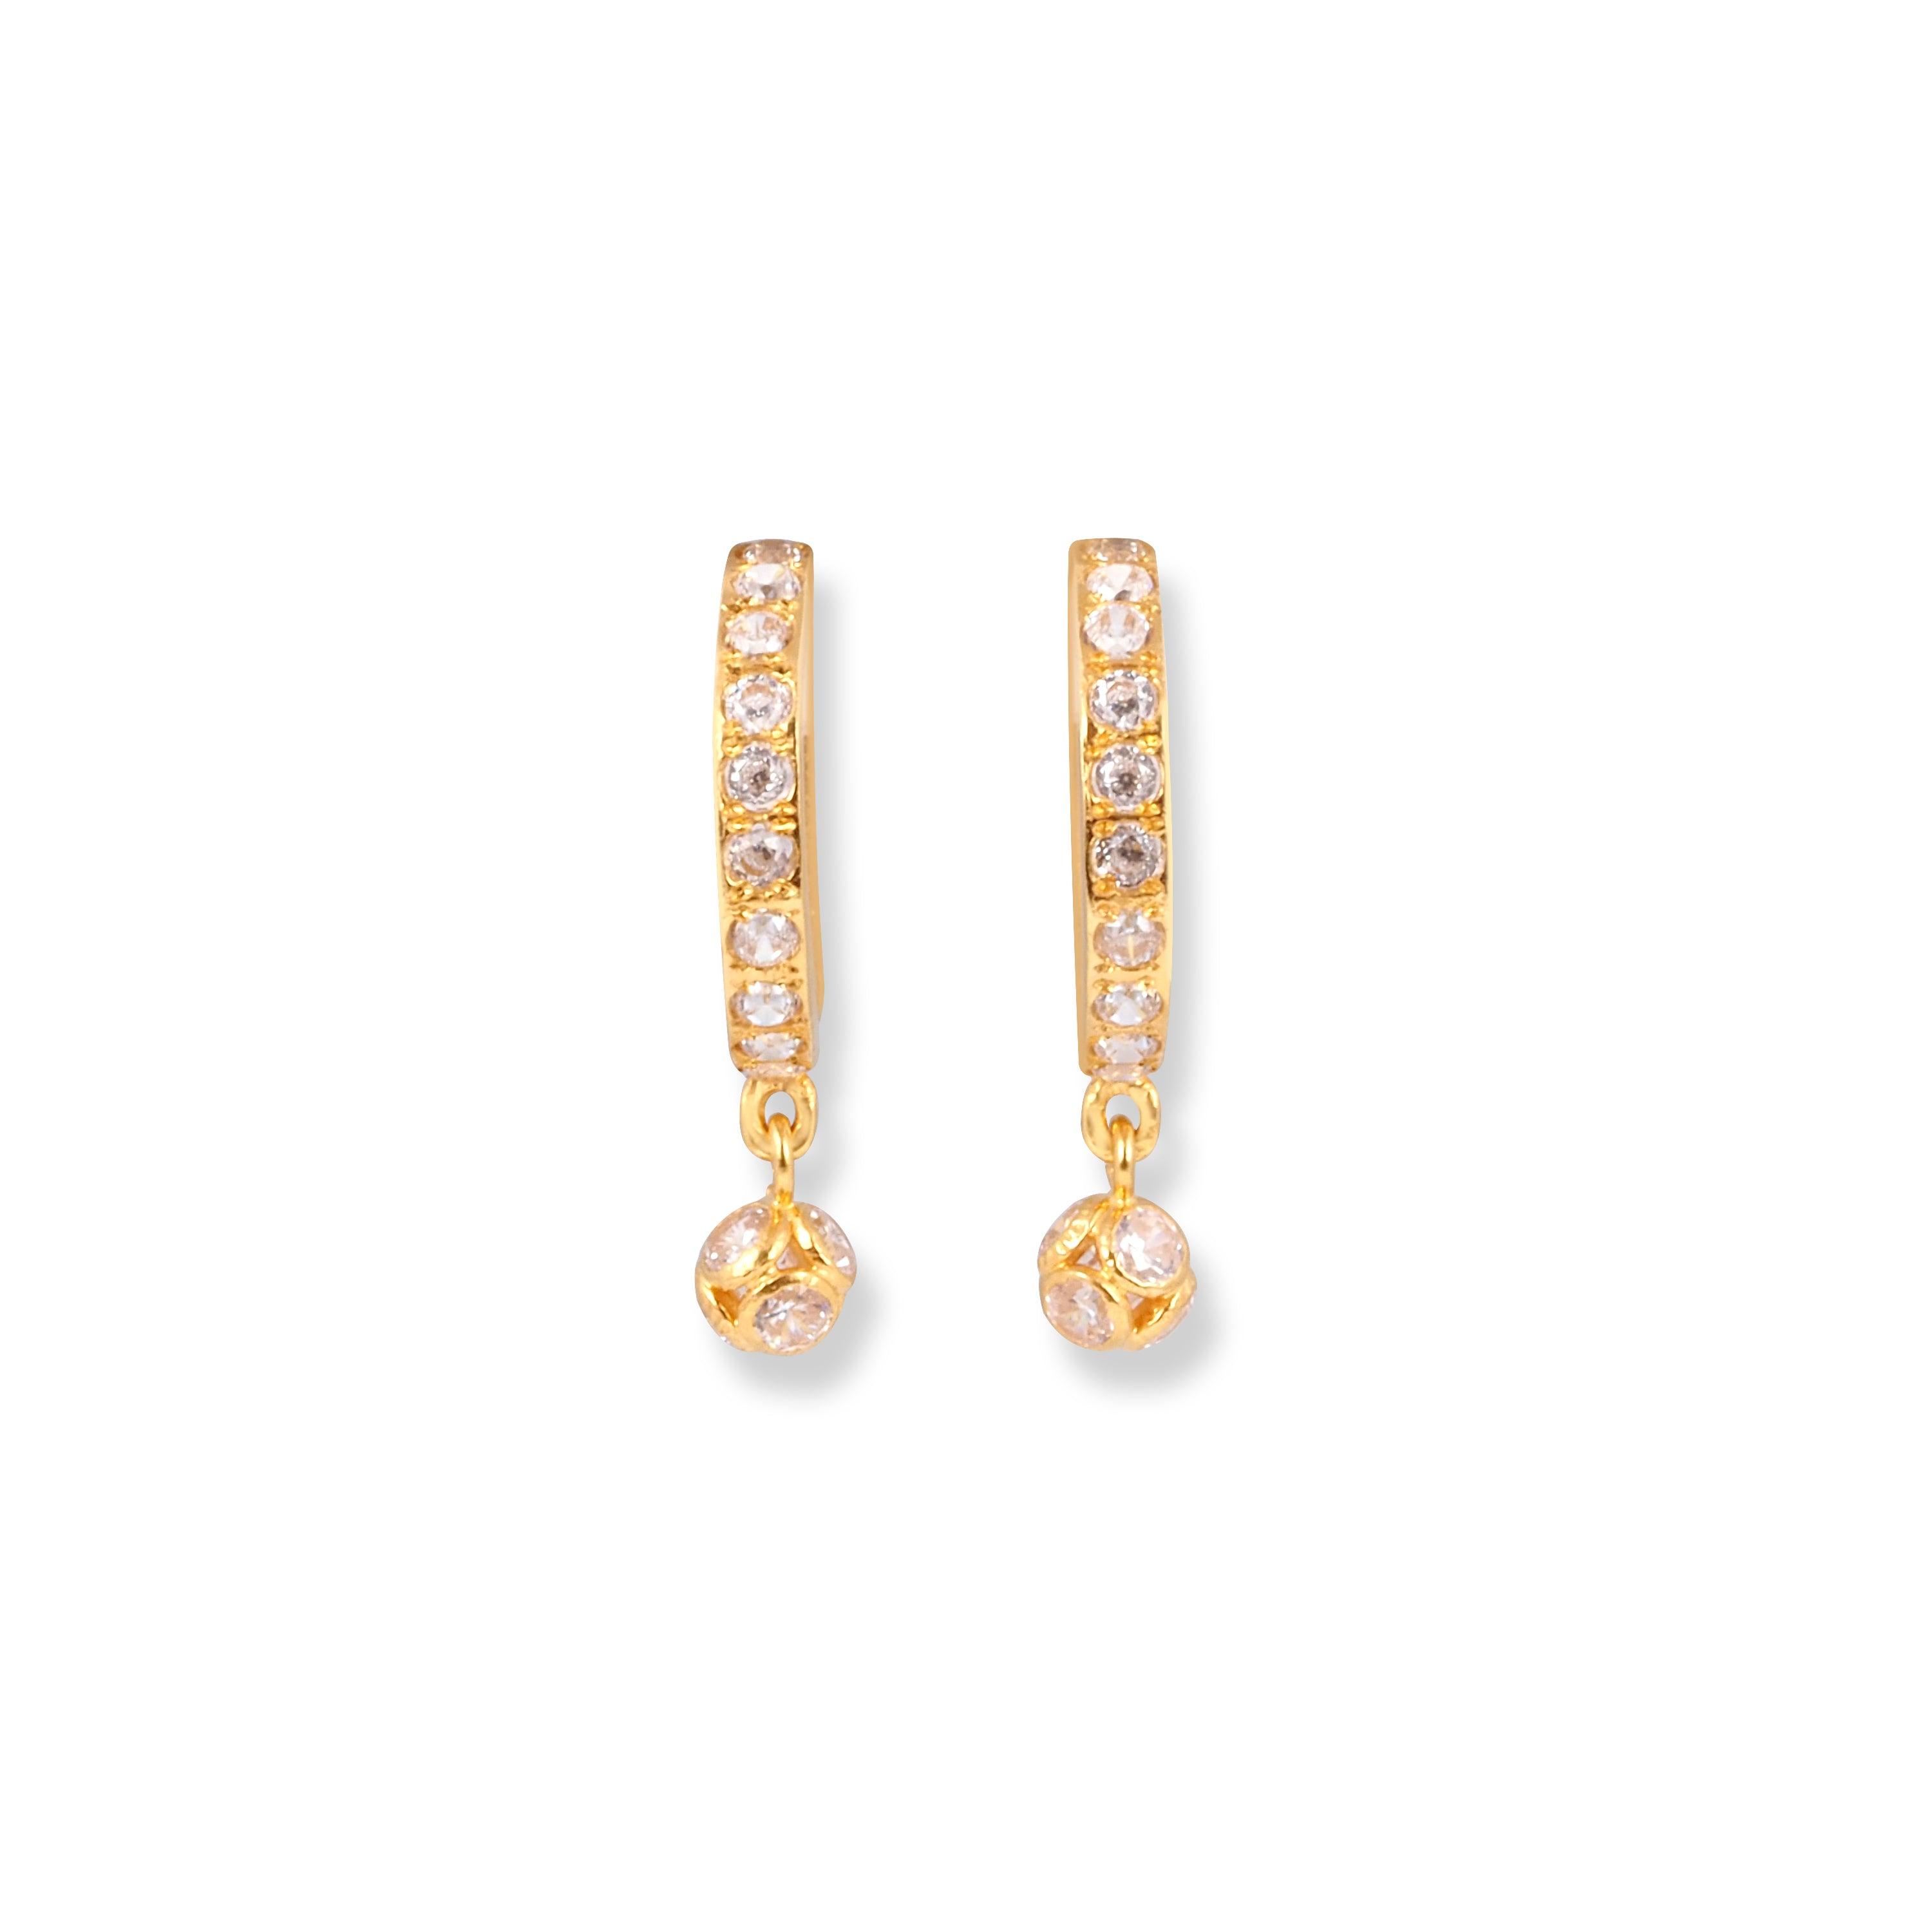 22ct Gold Cubic Zirconia Hoop Earrings with Drops E-7653 - Minar Jewellers